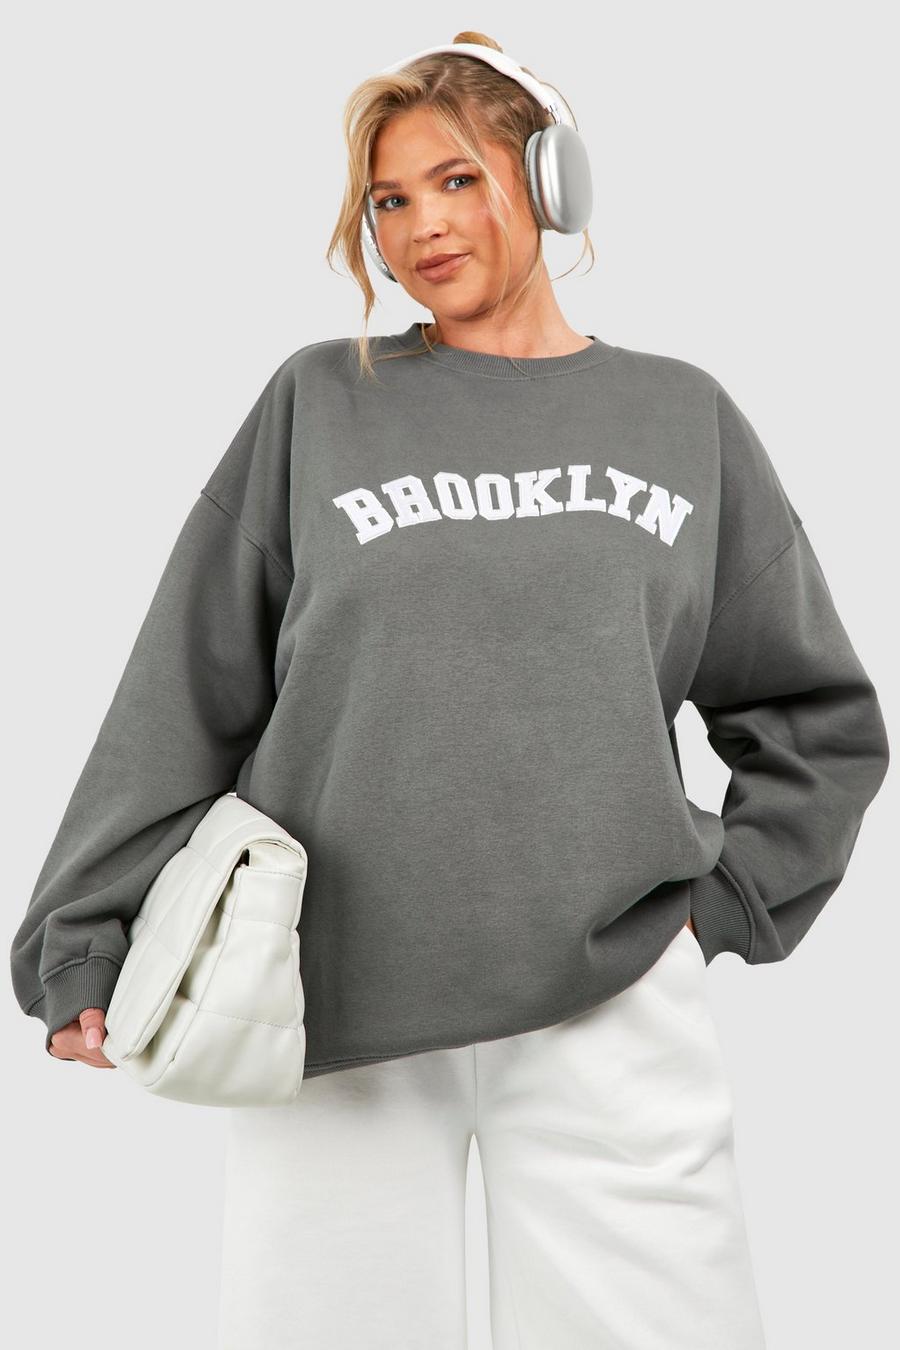 Grande taille - Sweat à écusson Brooklyn, Charcoal grey